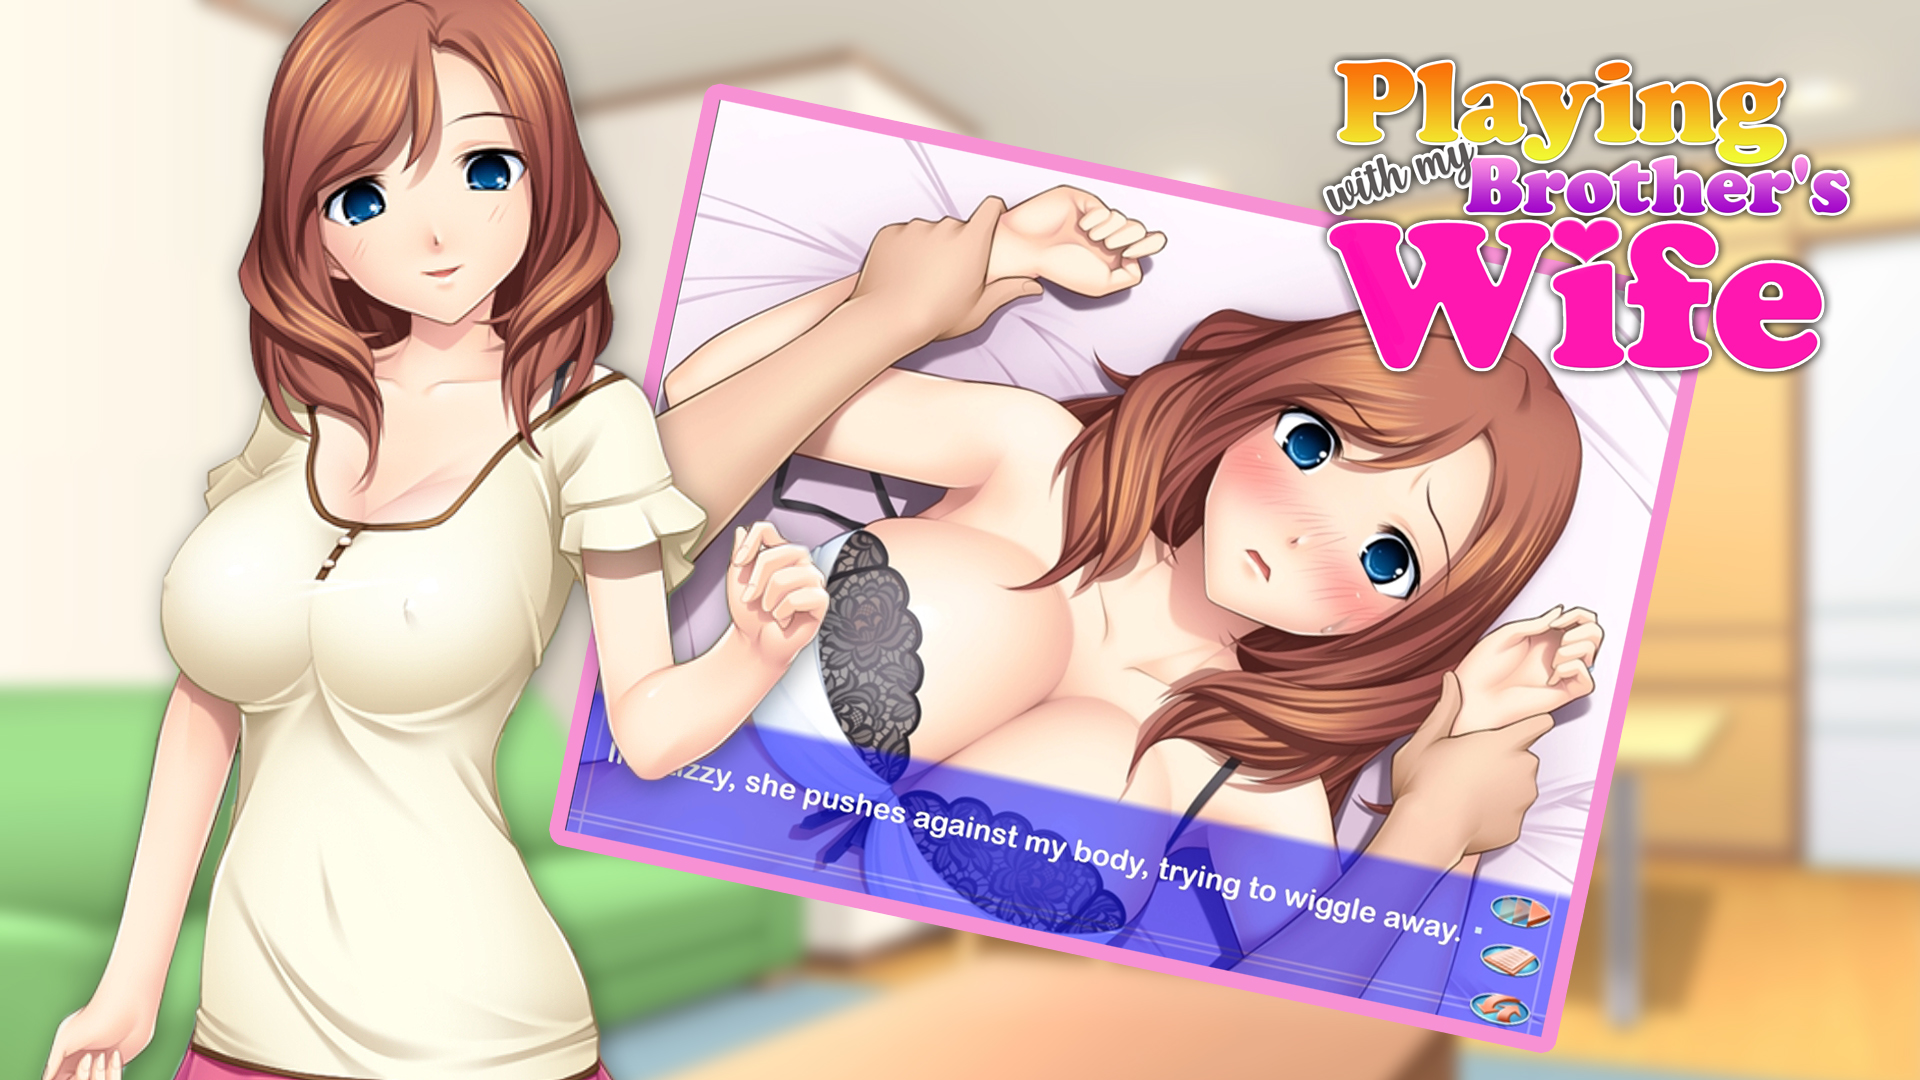 Playing with my brothers wife - Hentai and Porn Games image